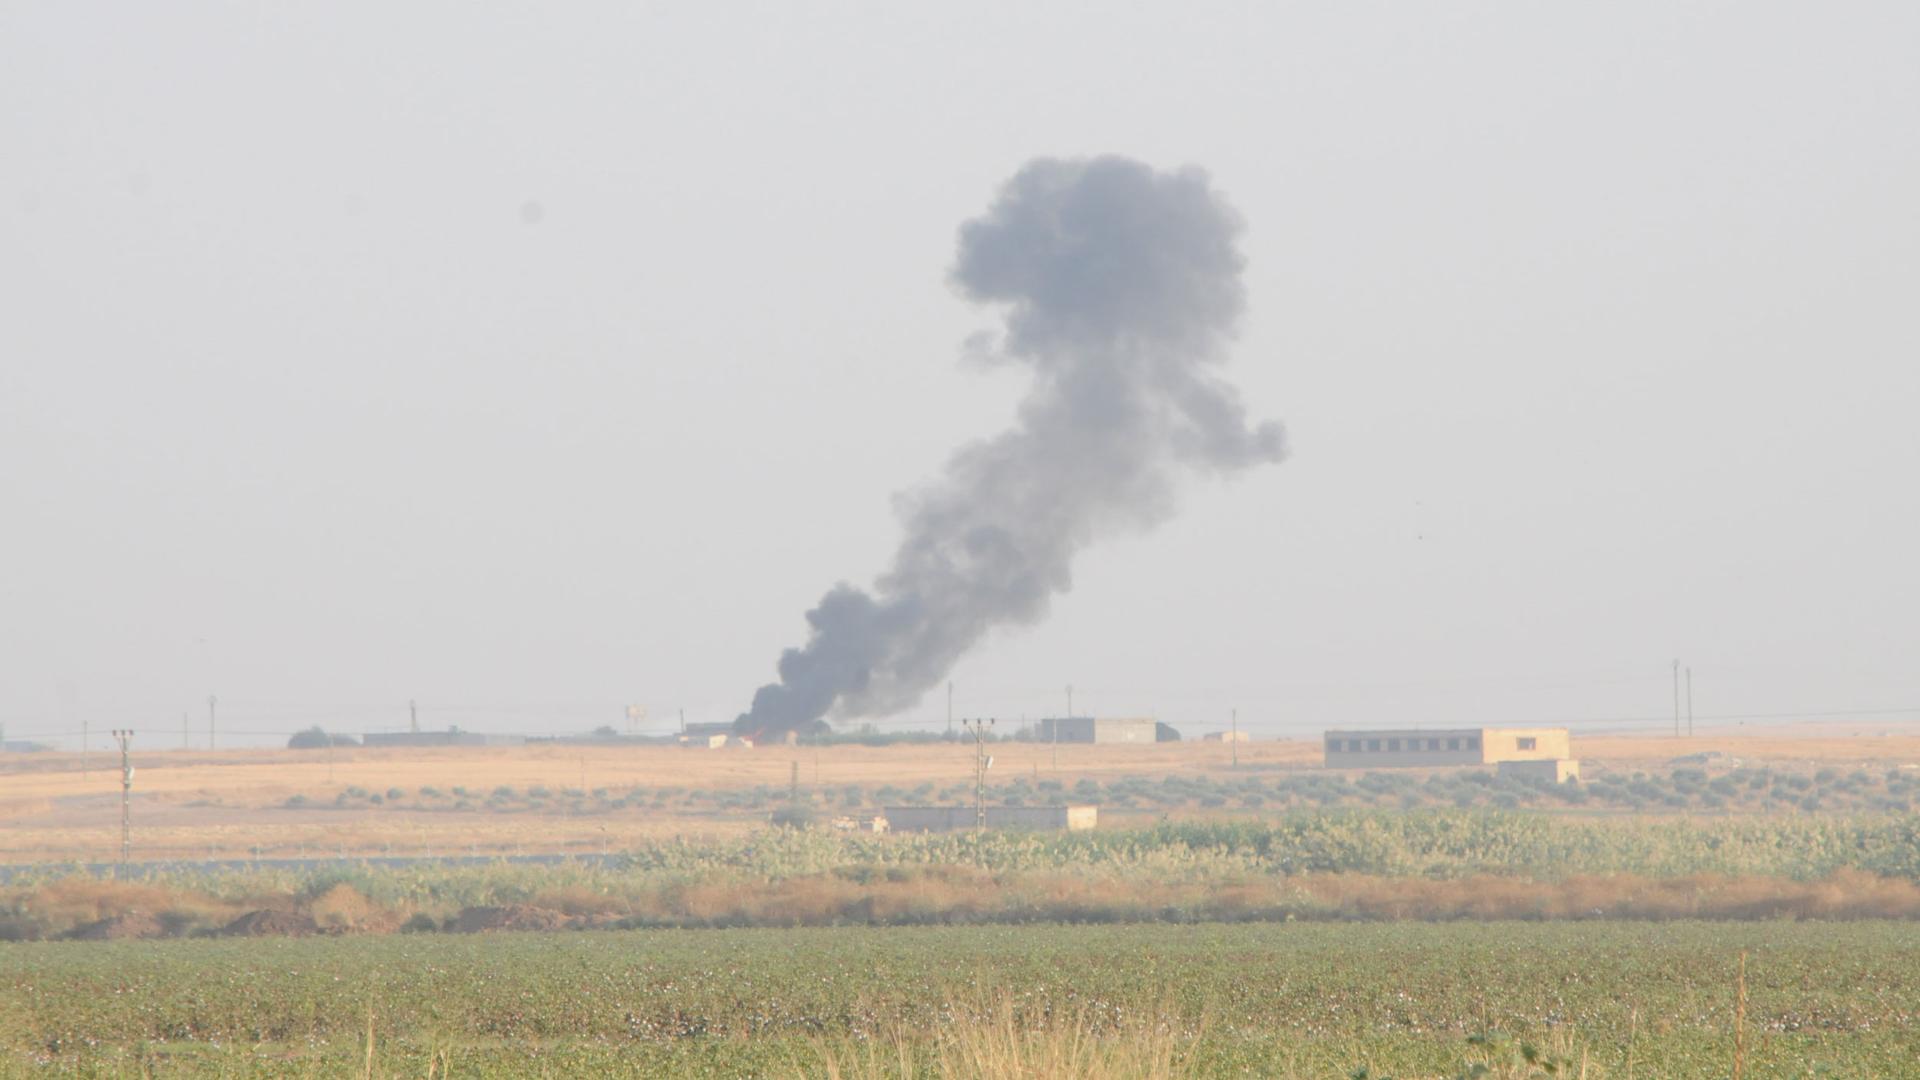 Smoke rises from the Syrian side of the border.